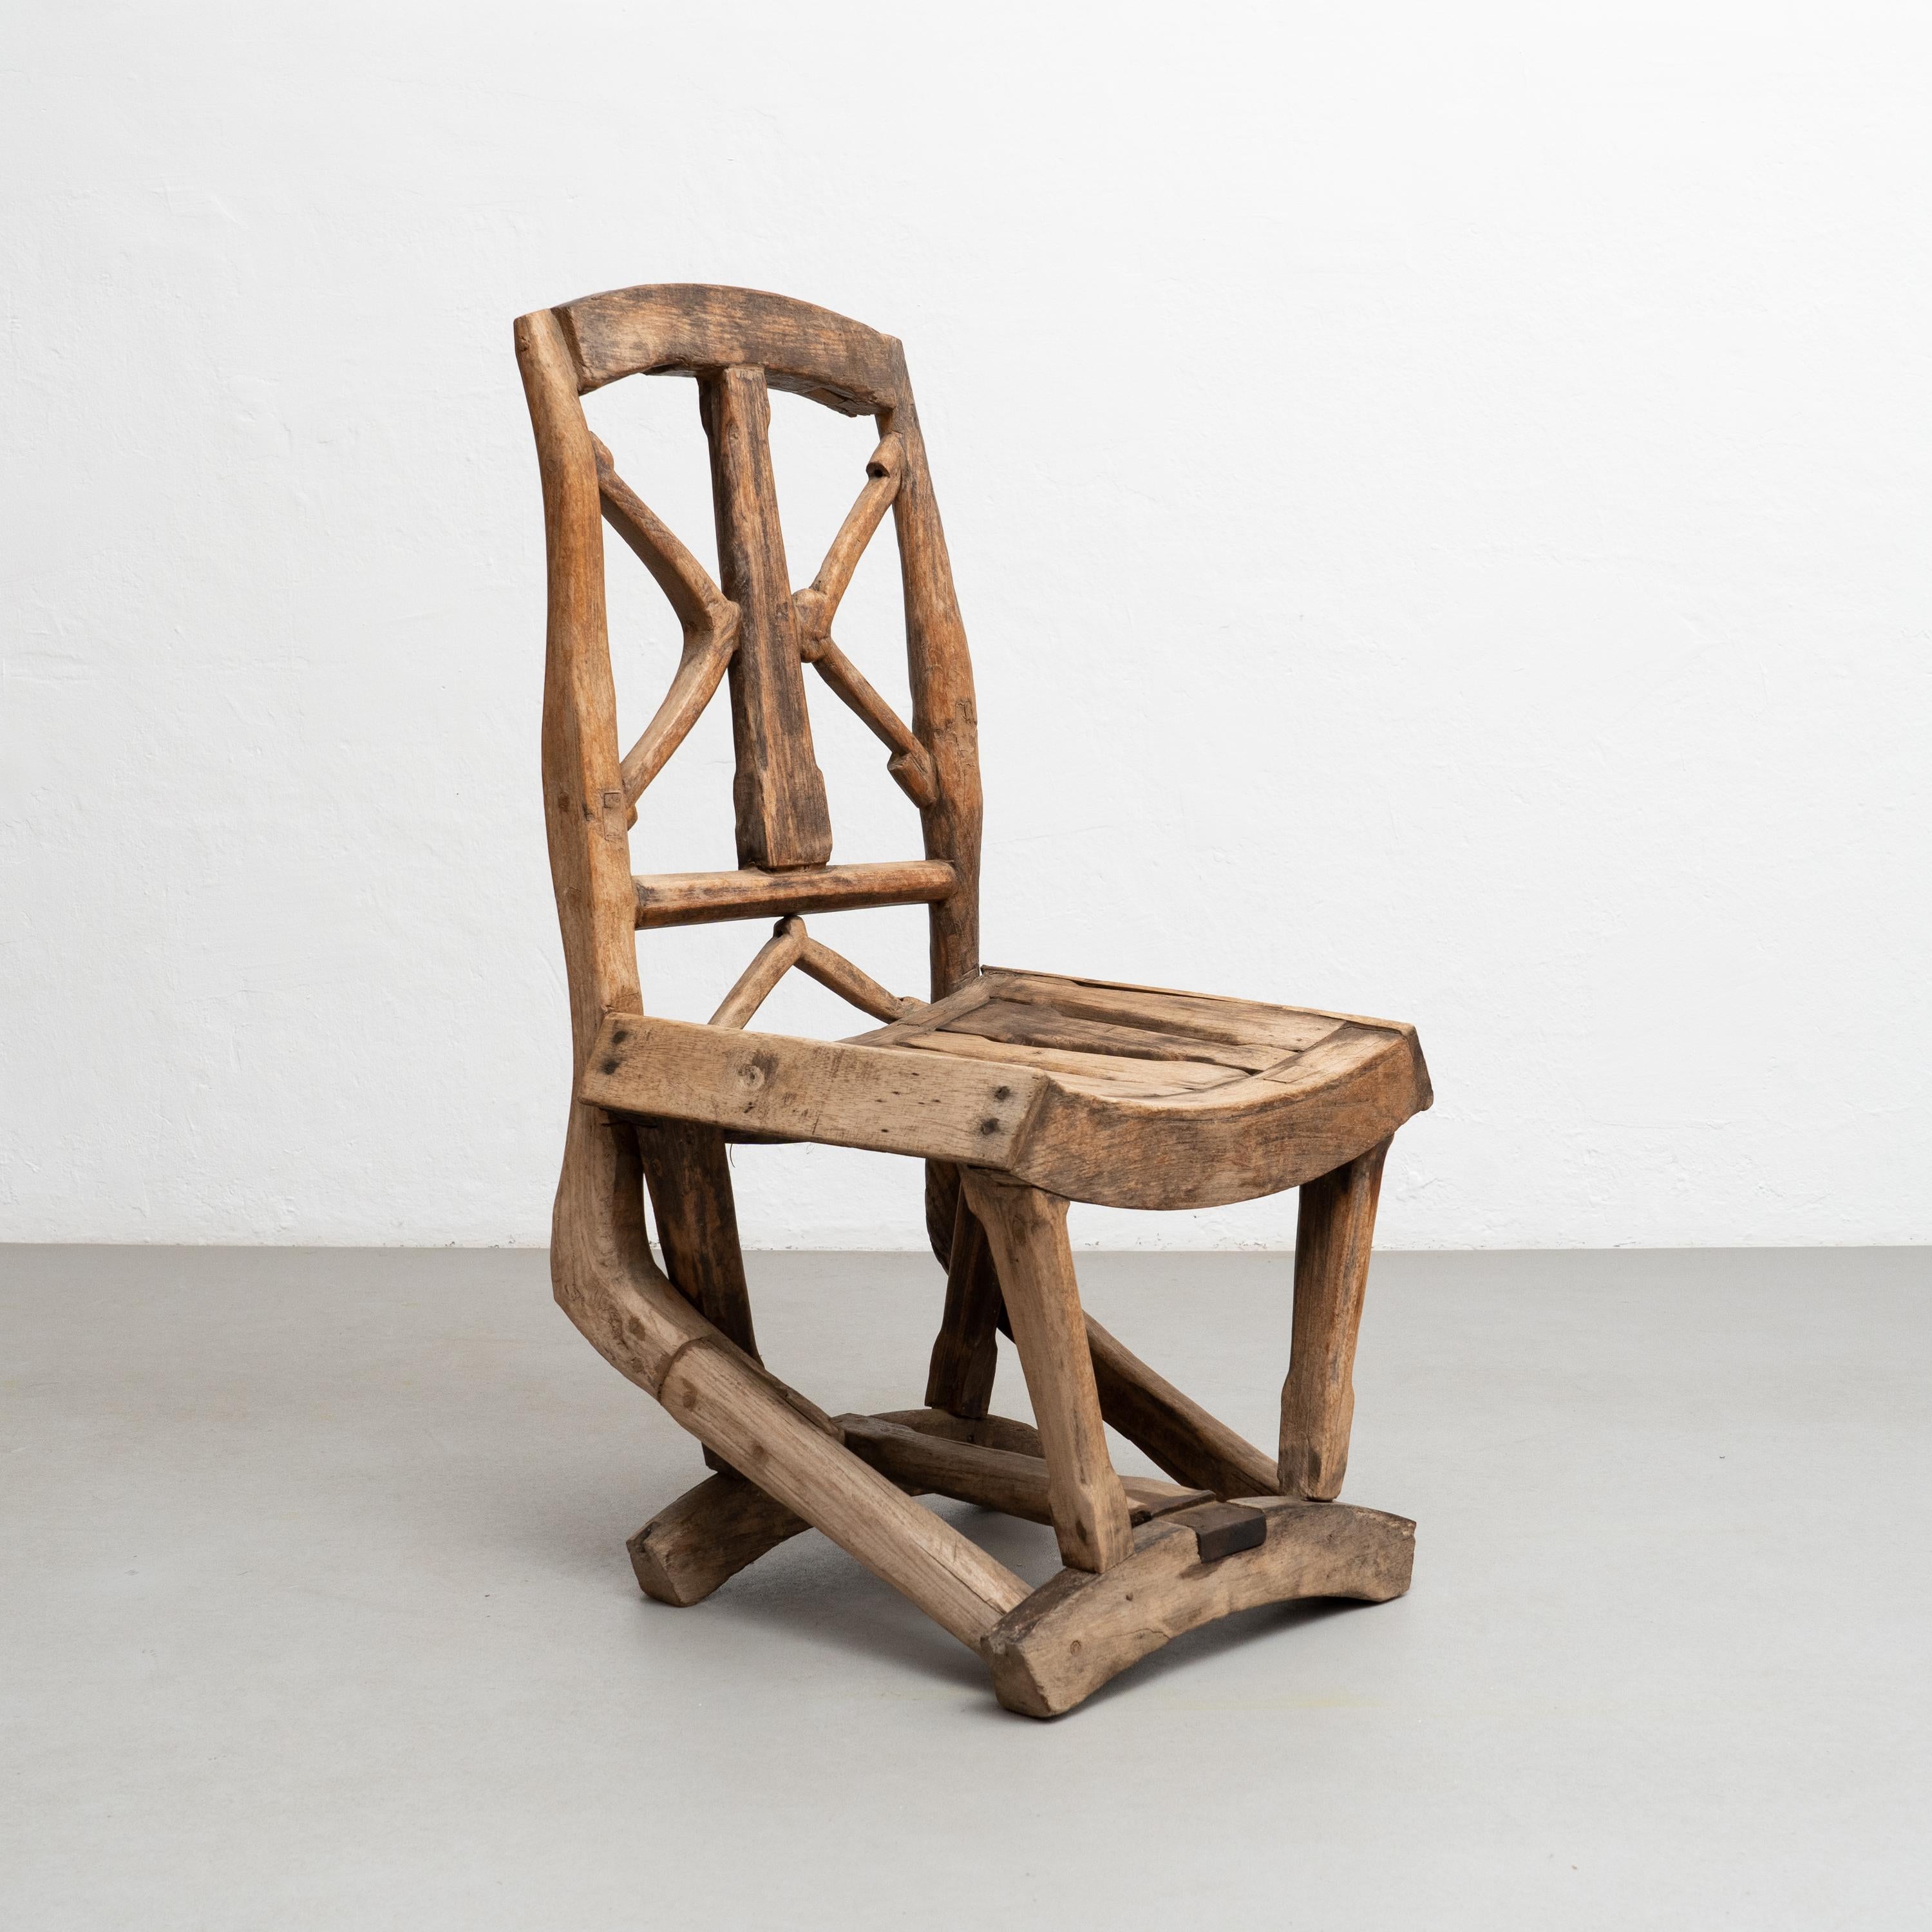 Rustic handmade wood chair.

By unknown artisan in Spain, circa 1930.

In good original condition, with minor wear consistent with age and use, preserving a beautiful patina.

Materials:
Wood.

